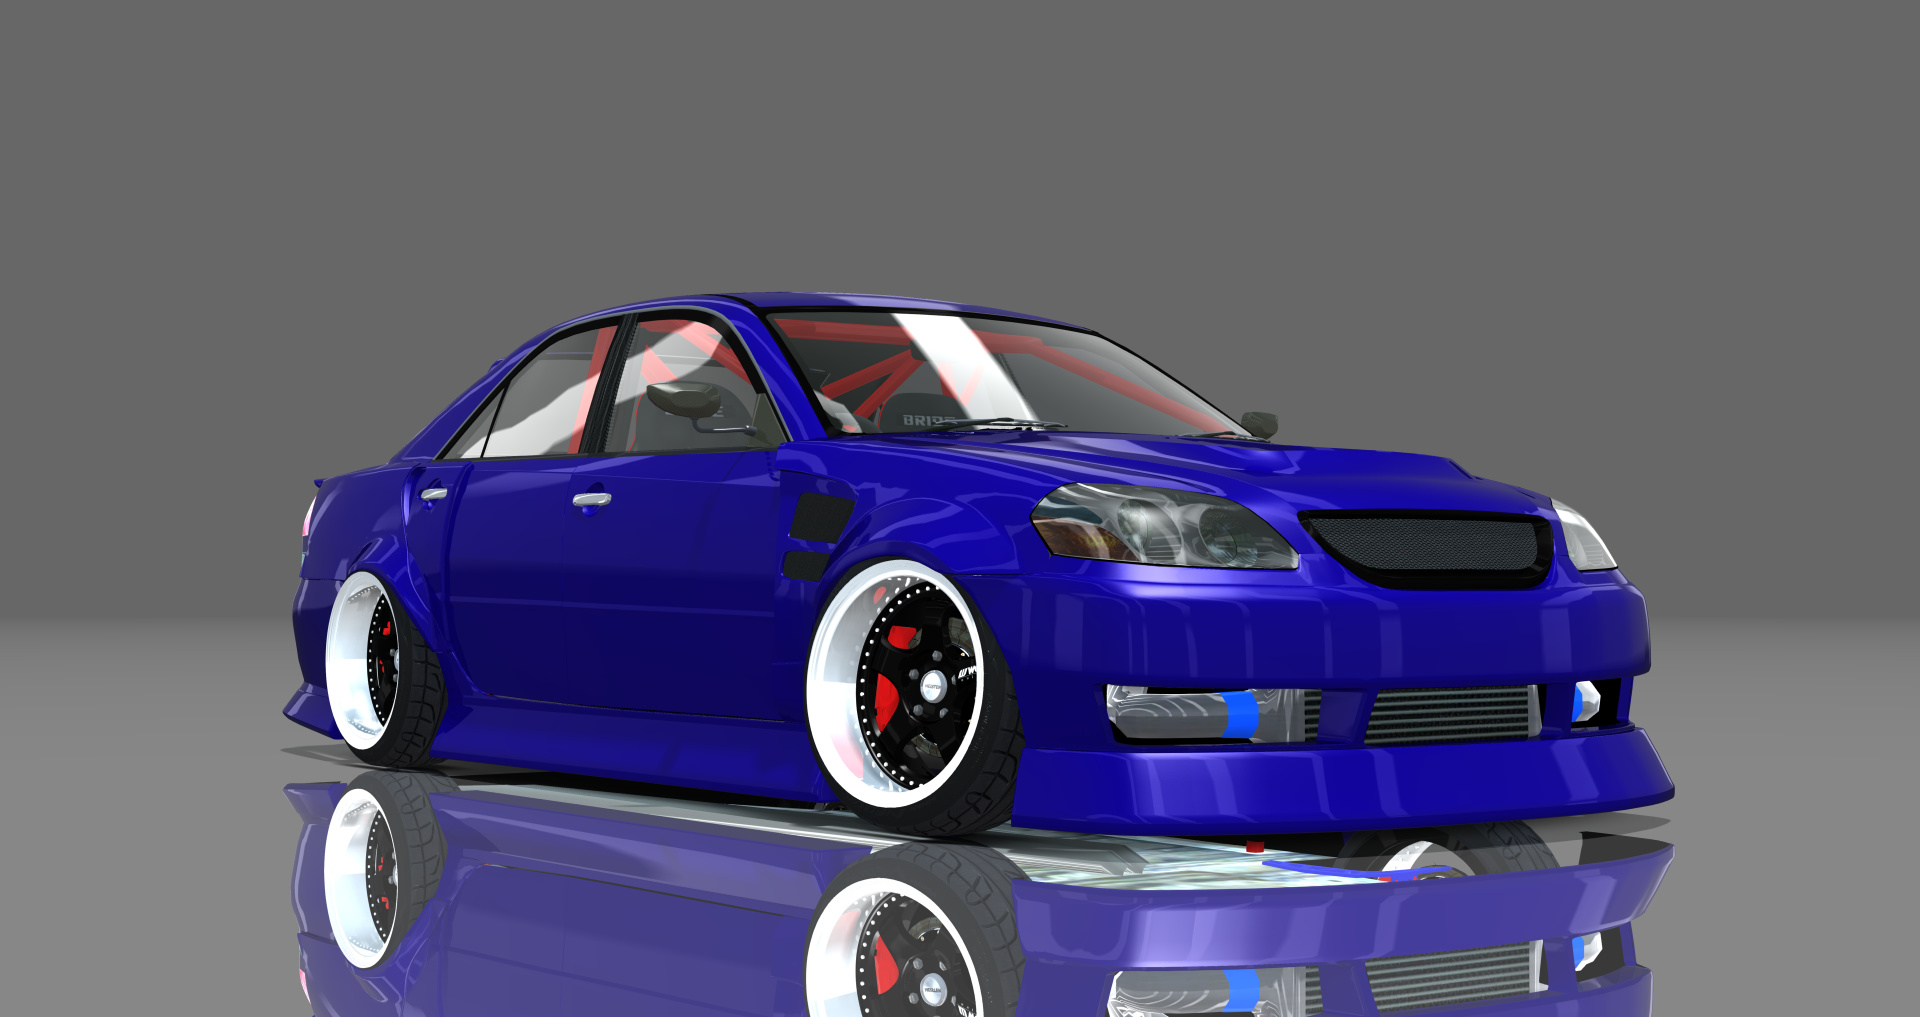 DTP Toyota JZX110 Mark2, skin supersonic_blue